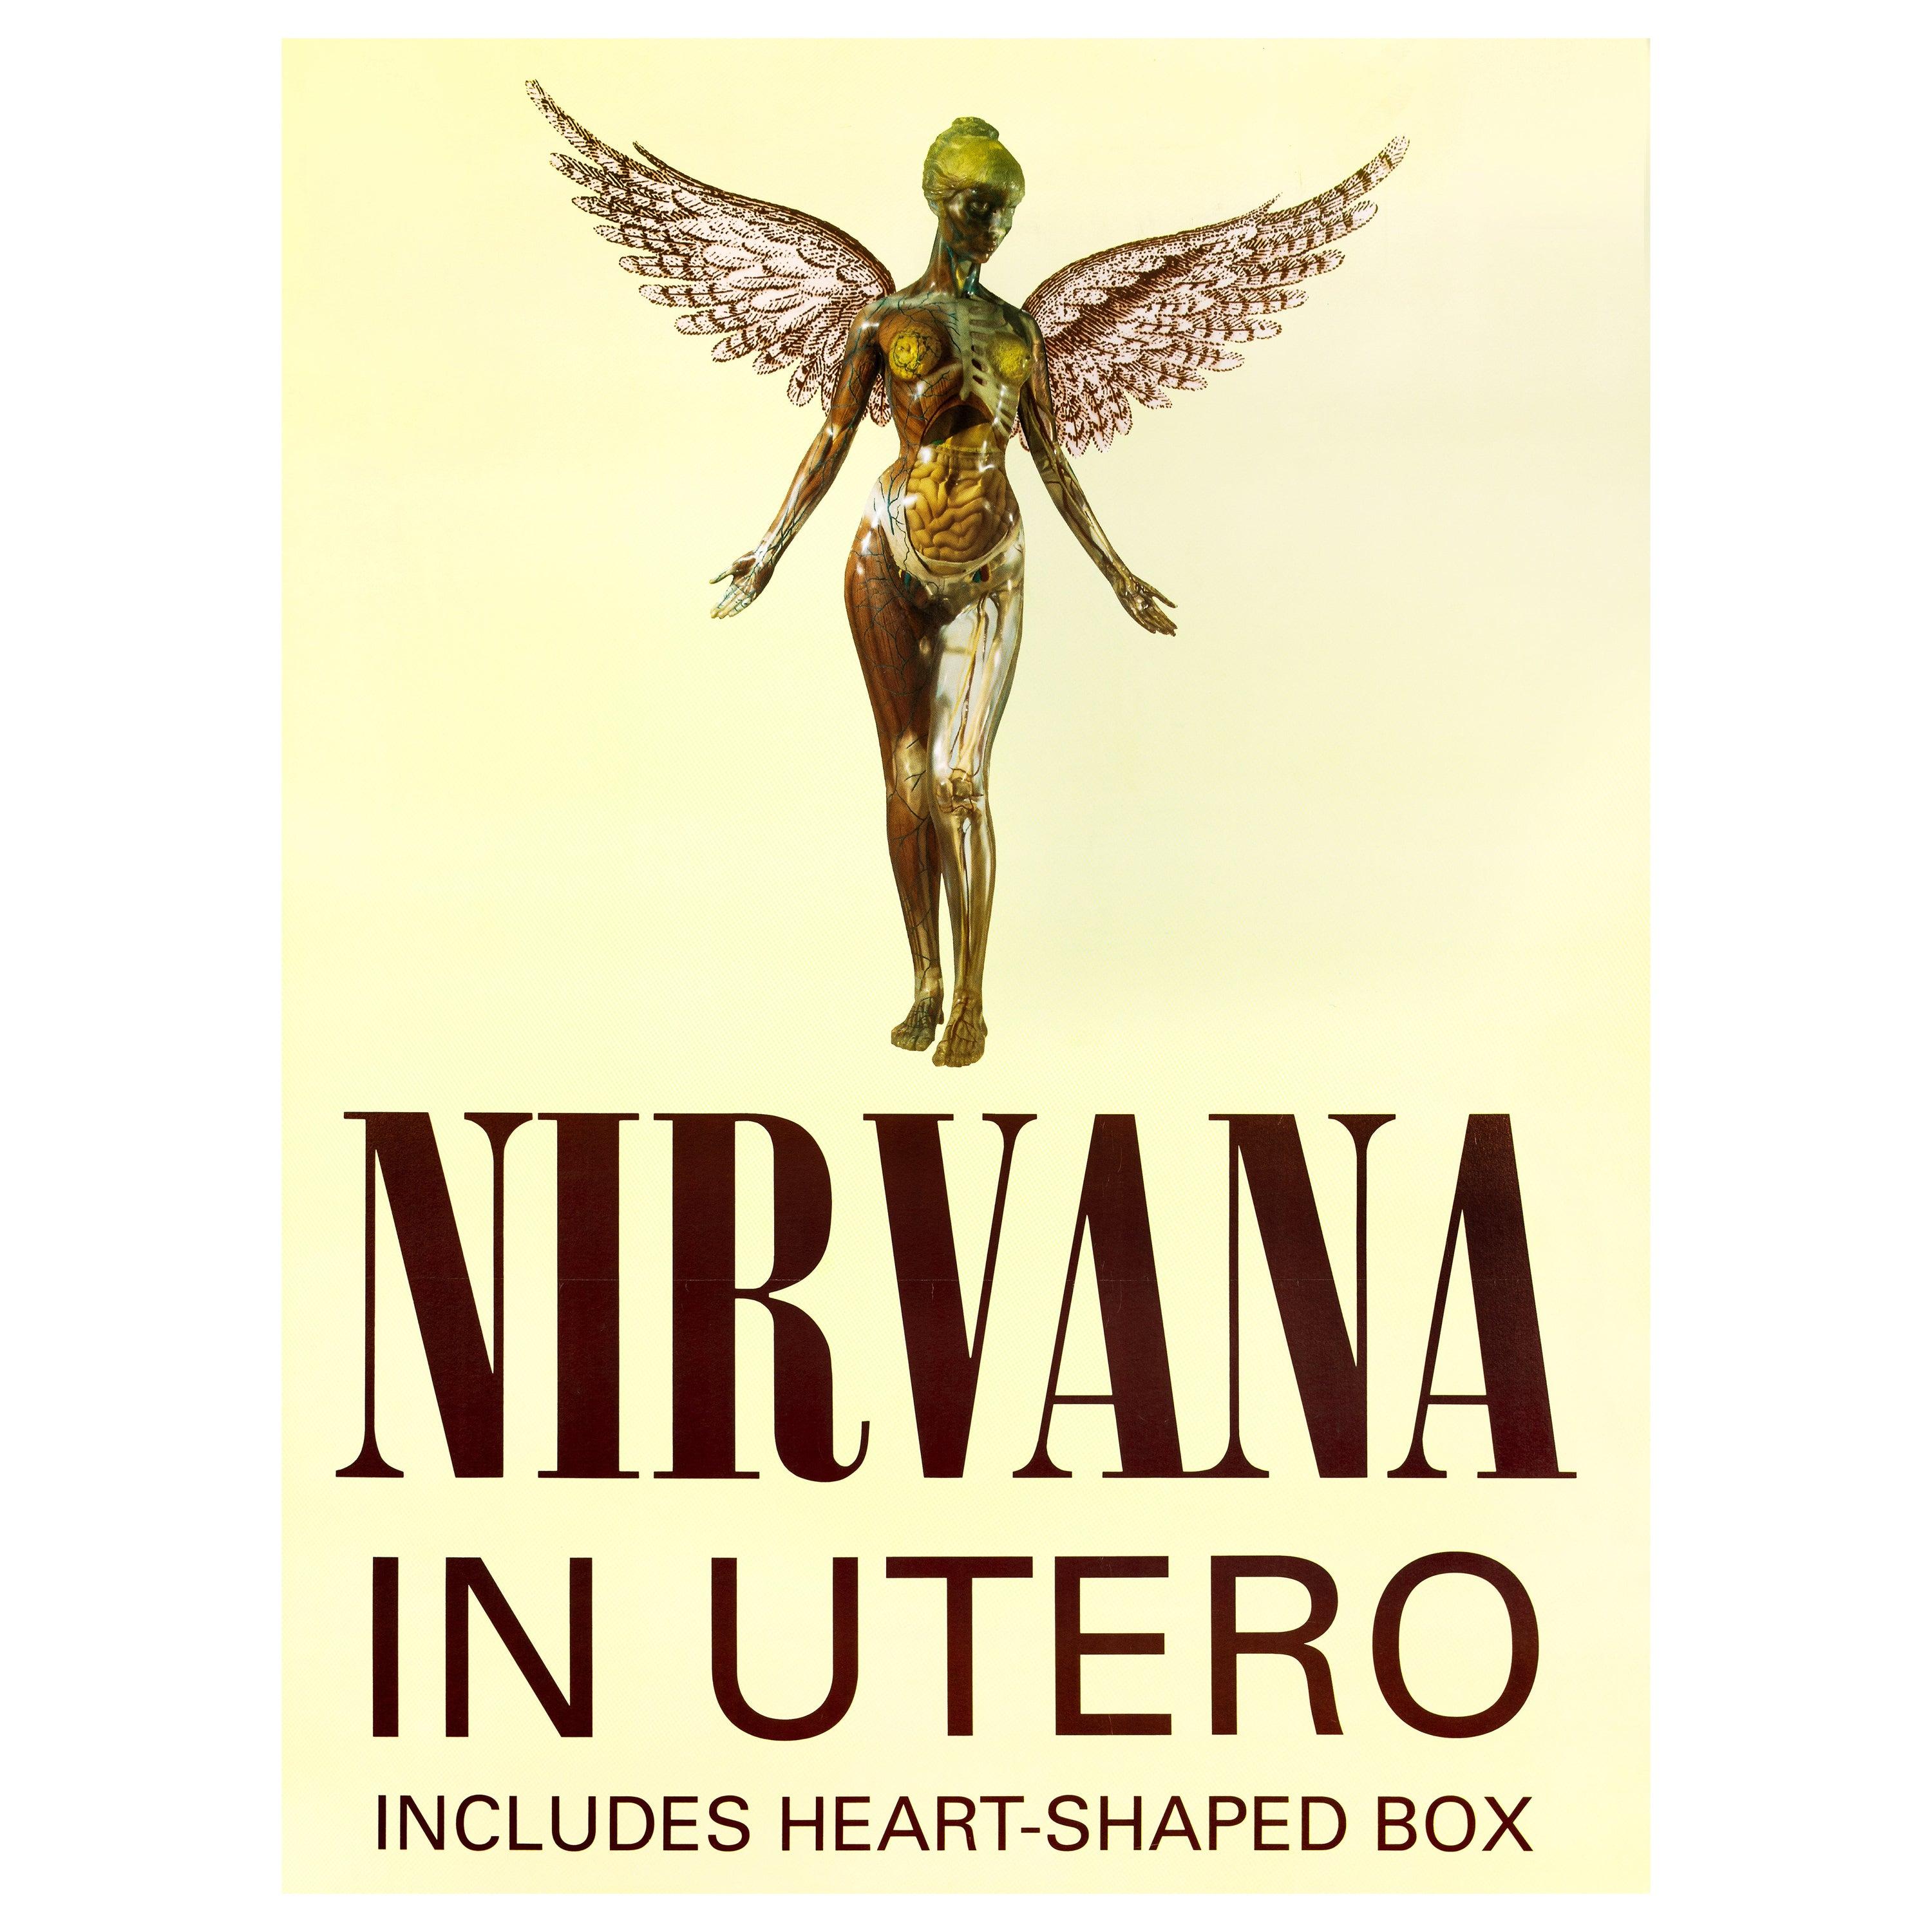 Nirvana 'In Utero' Original UK Bus Stop Promotional Poster, 1993 - Art by Unknown